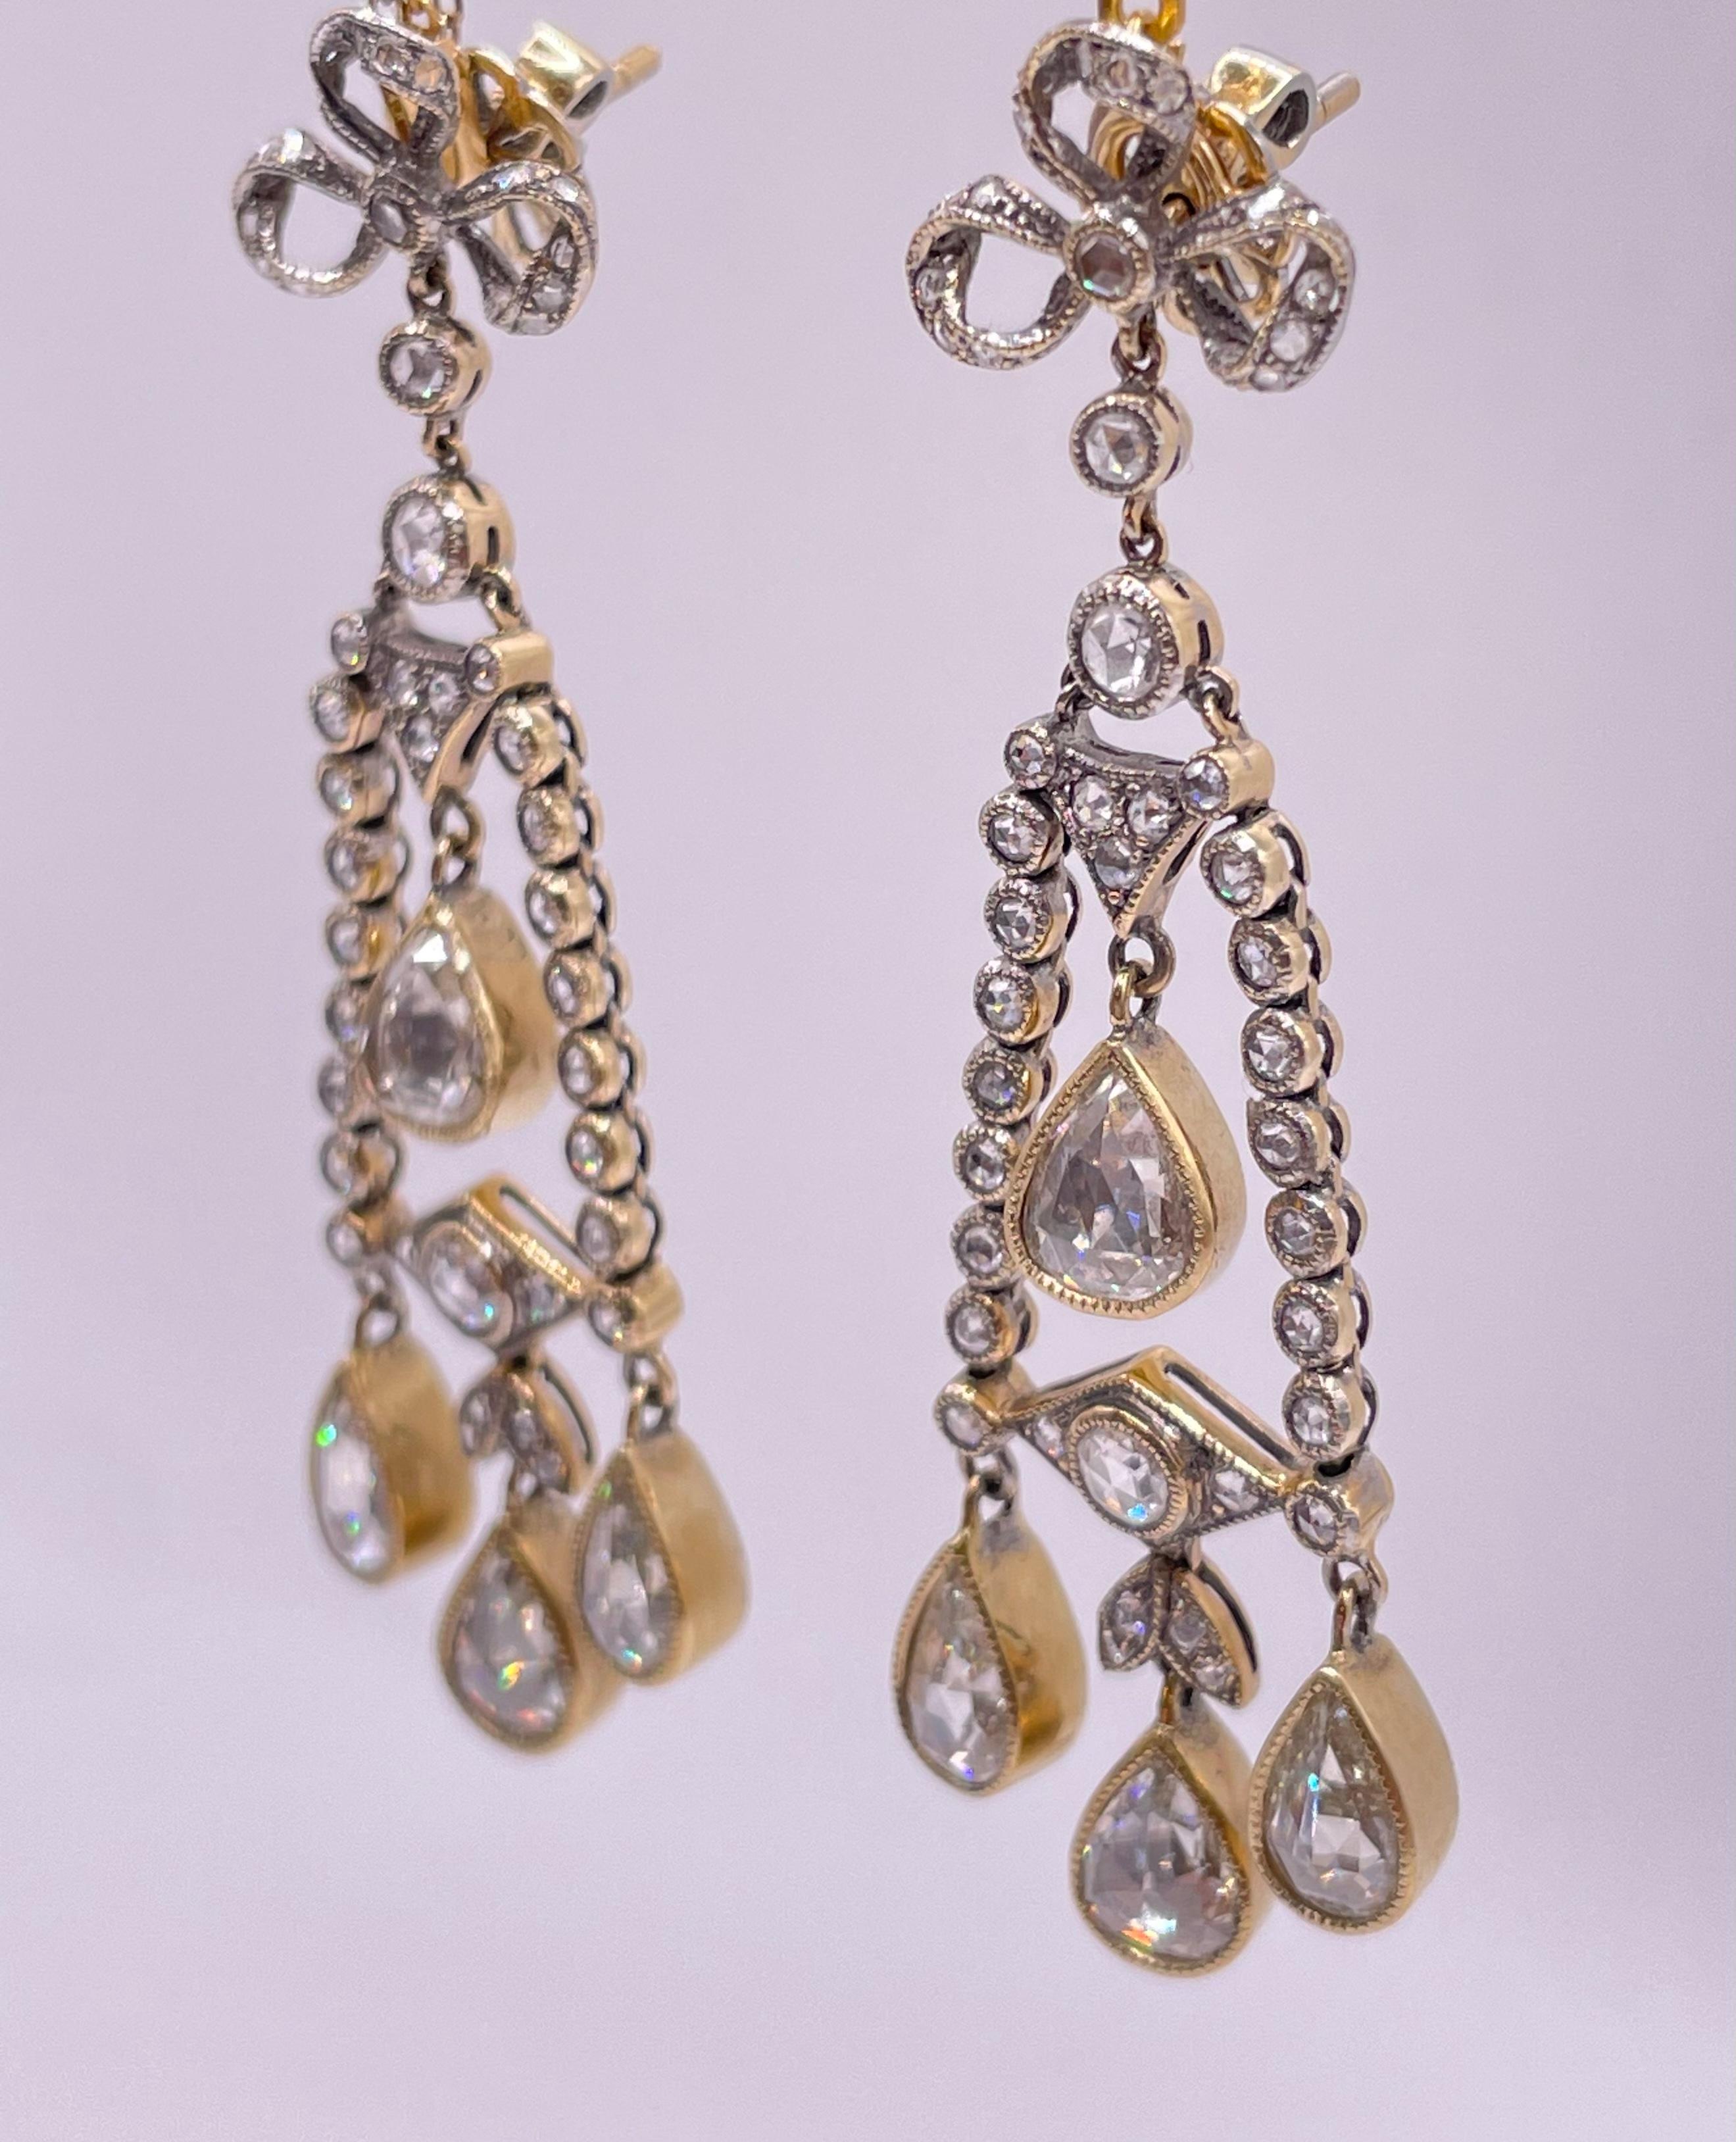 An absolutely superb pair of rose-cut diamonds earrings from 1920s ( Artdeco ) .
These incredible earrings are crafted in 14k gold and feature a sparkling array of rose cut Diamond . Approximately 5.00 carats , in which are 8 pieces of 0.50 carat